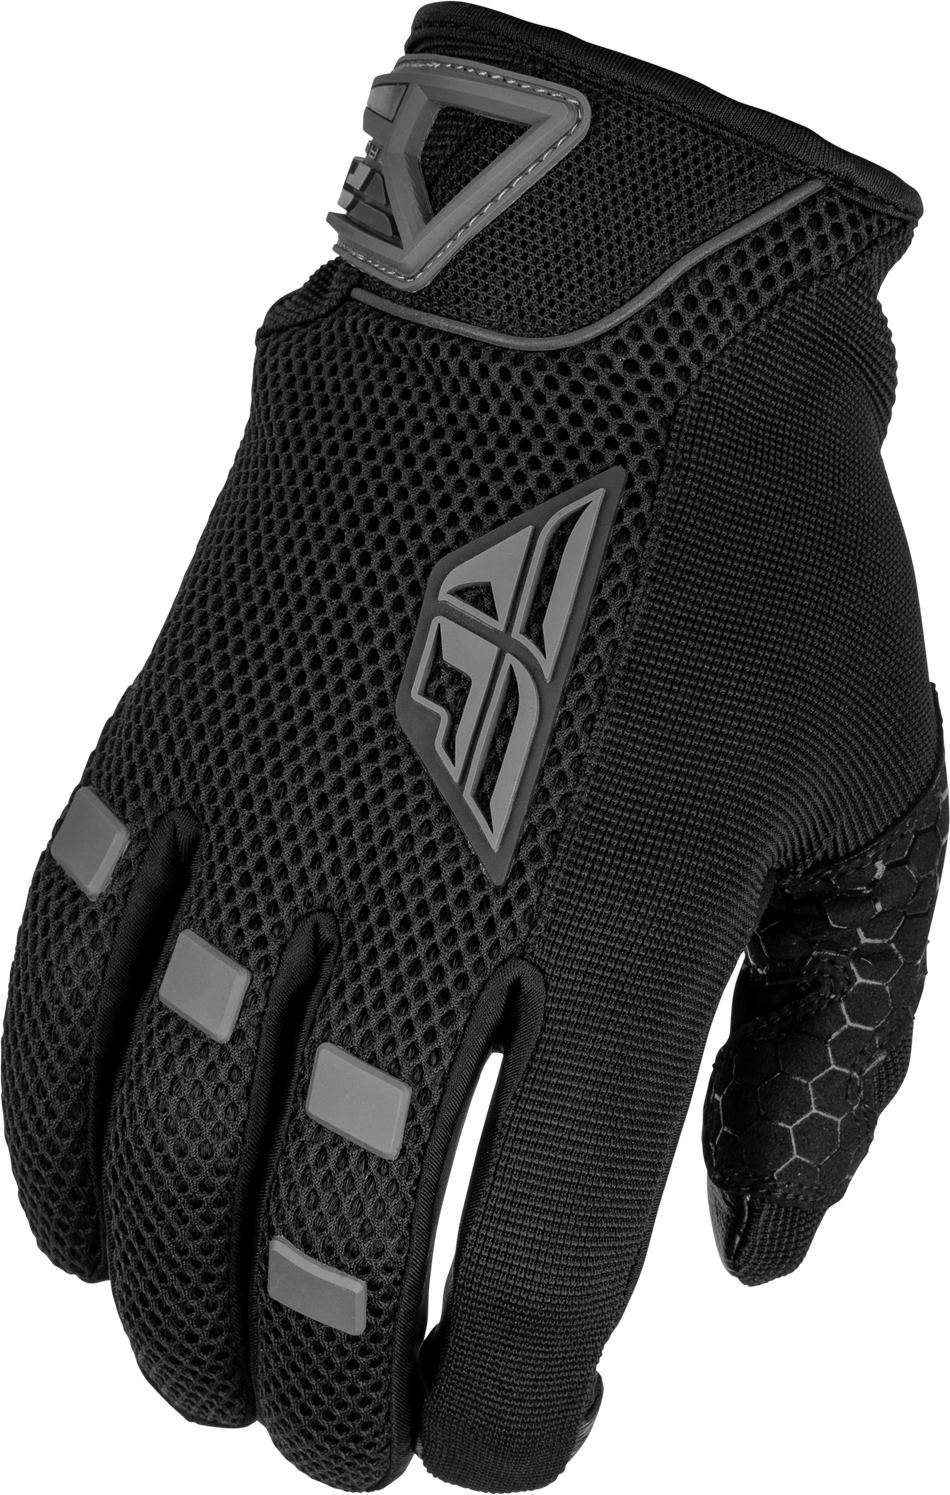 FLY RACING Women's Coolpro Gloves Black Sm 476-6214S